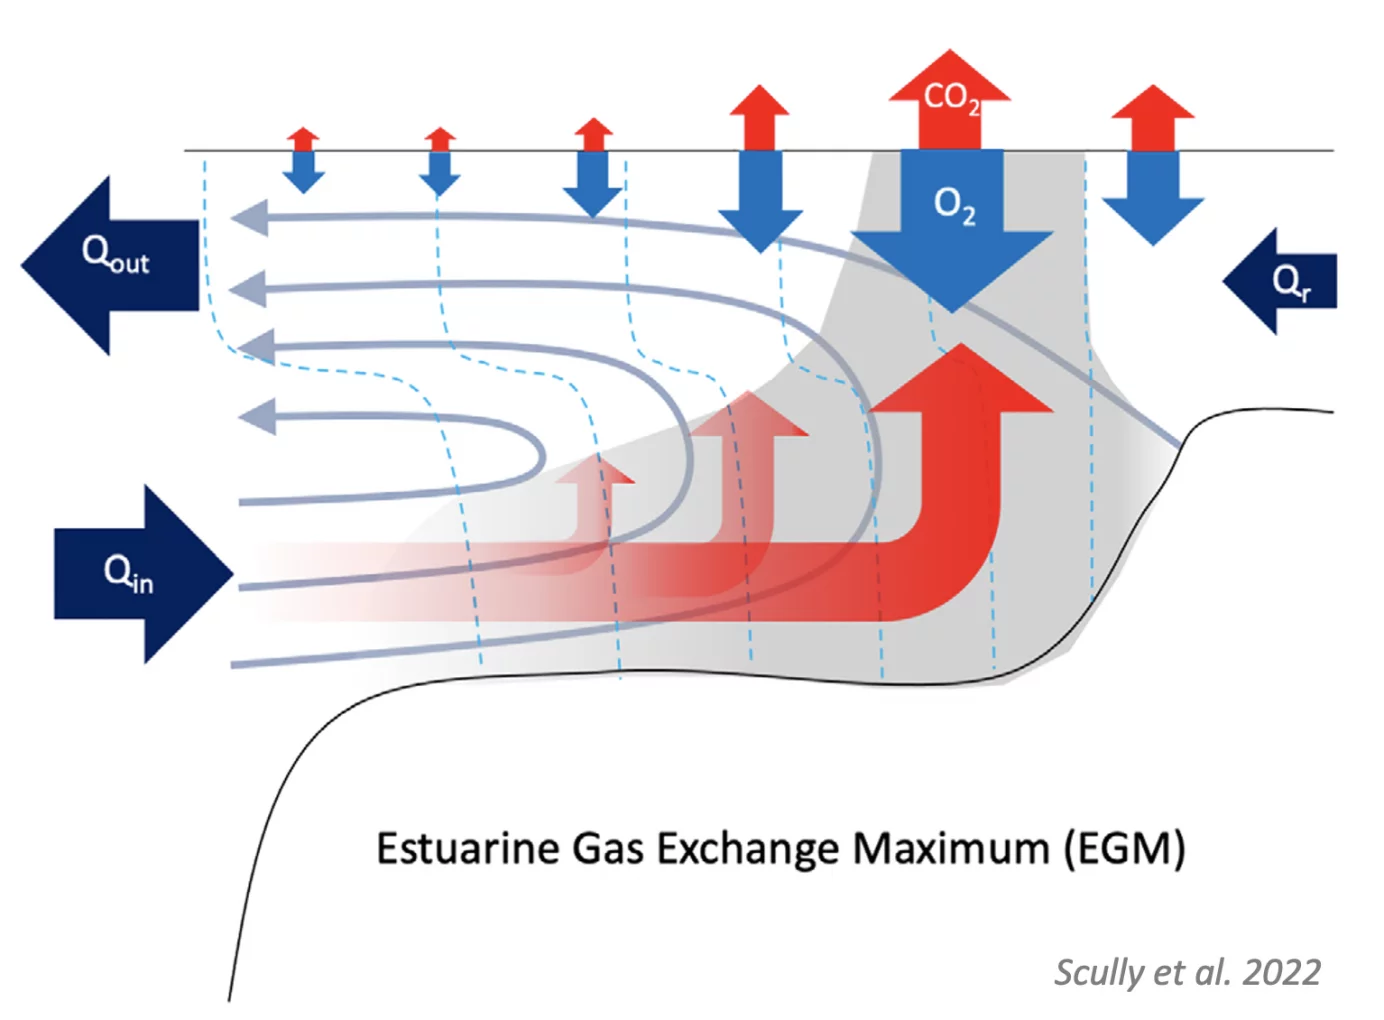 FROM SCULLY ET AL. 2022, FIGURE 7. CONCEPTUAL MODEL OF THE ESTUARINE GAS EXCHANGE MAXIMUM. QR  IS THE RIVER DISCHARGE, QIN  IS THE RESIDUAL INFLOW AT THE MOUTH OF THE ESTUARY, AND QOUT  IS THE RESIDUAL OUTFLOW.